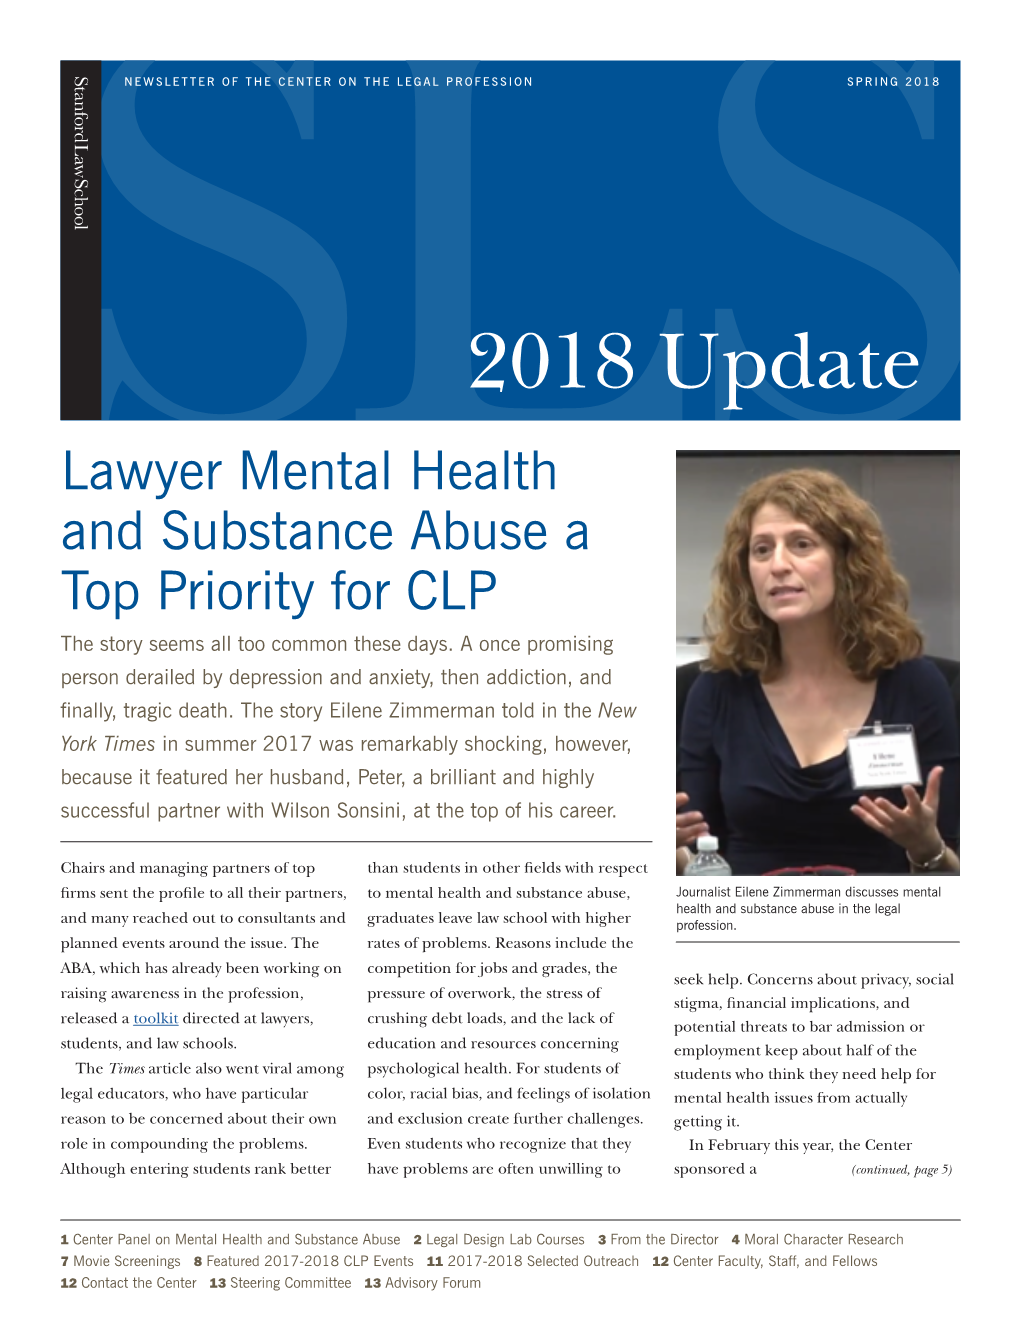 Lawyer Mental Health and Substance Abuse a Top Priority for CLP the Story Seems All Too Common These Days